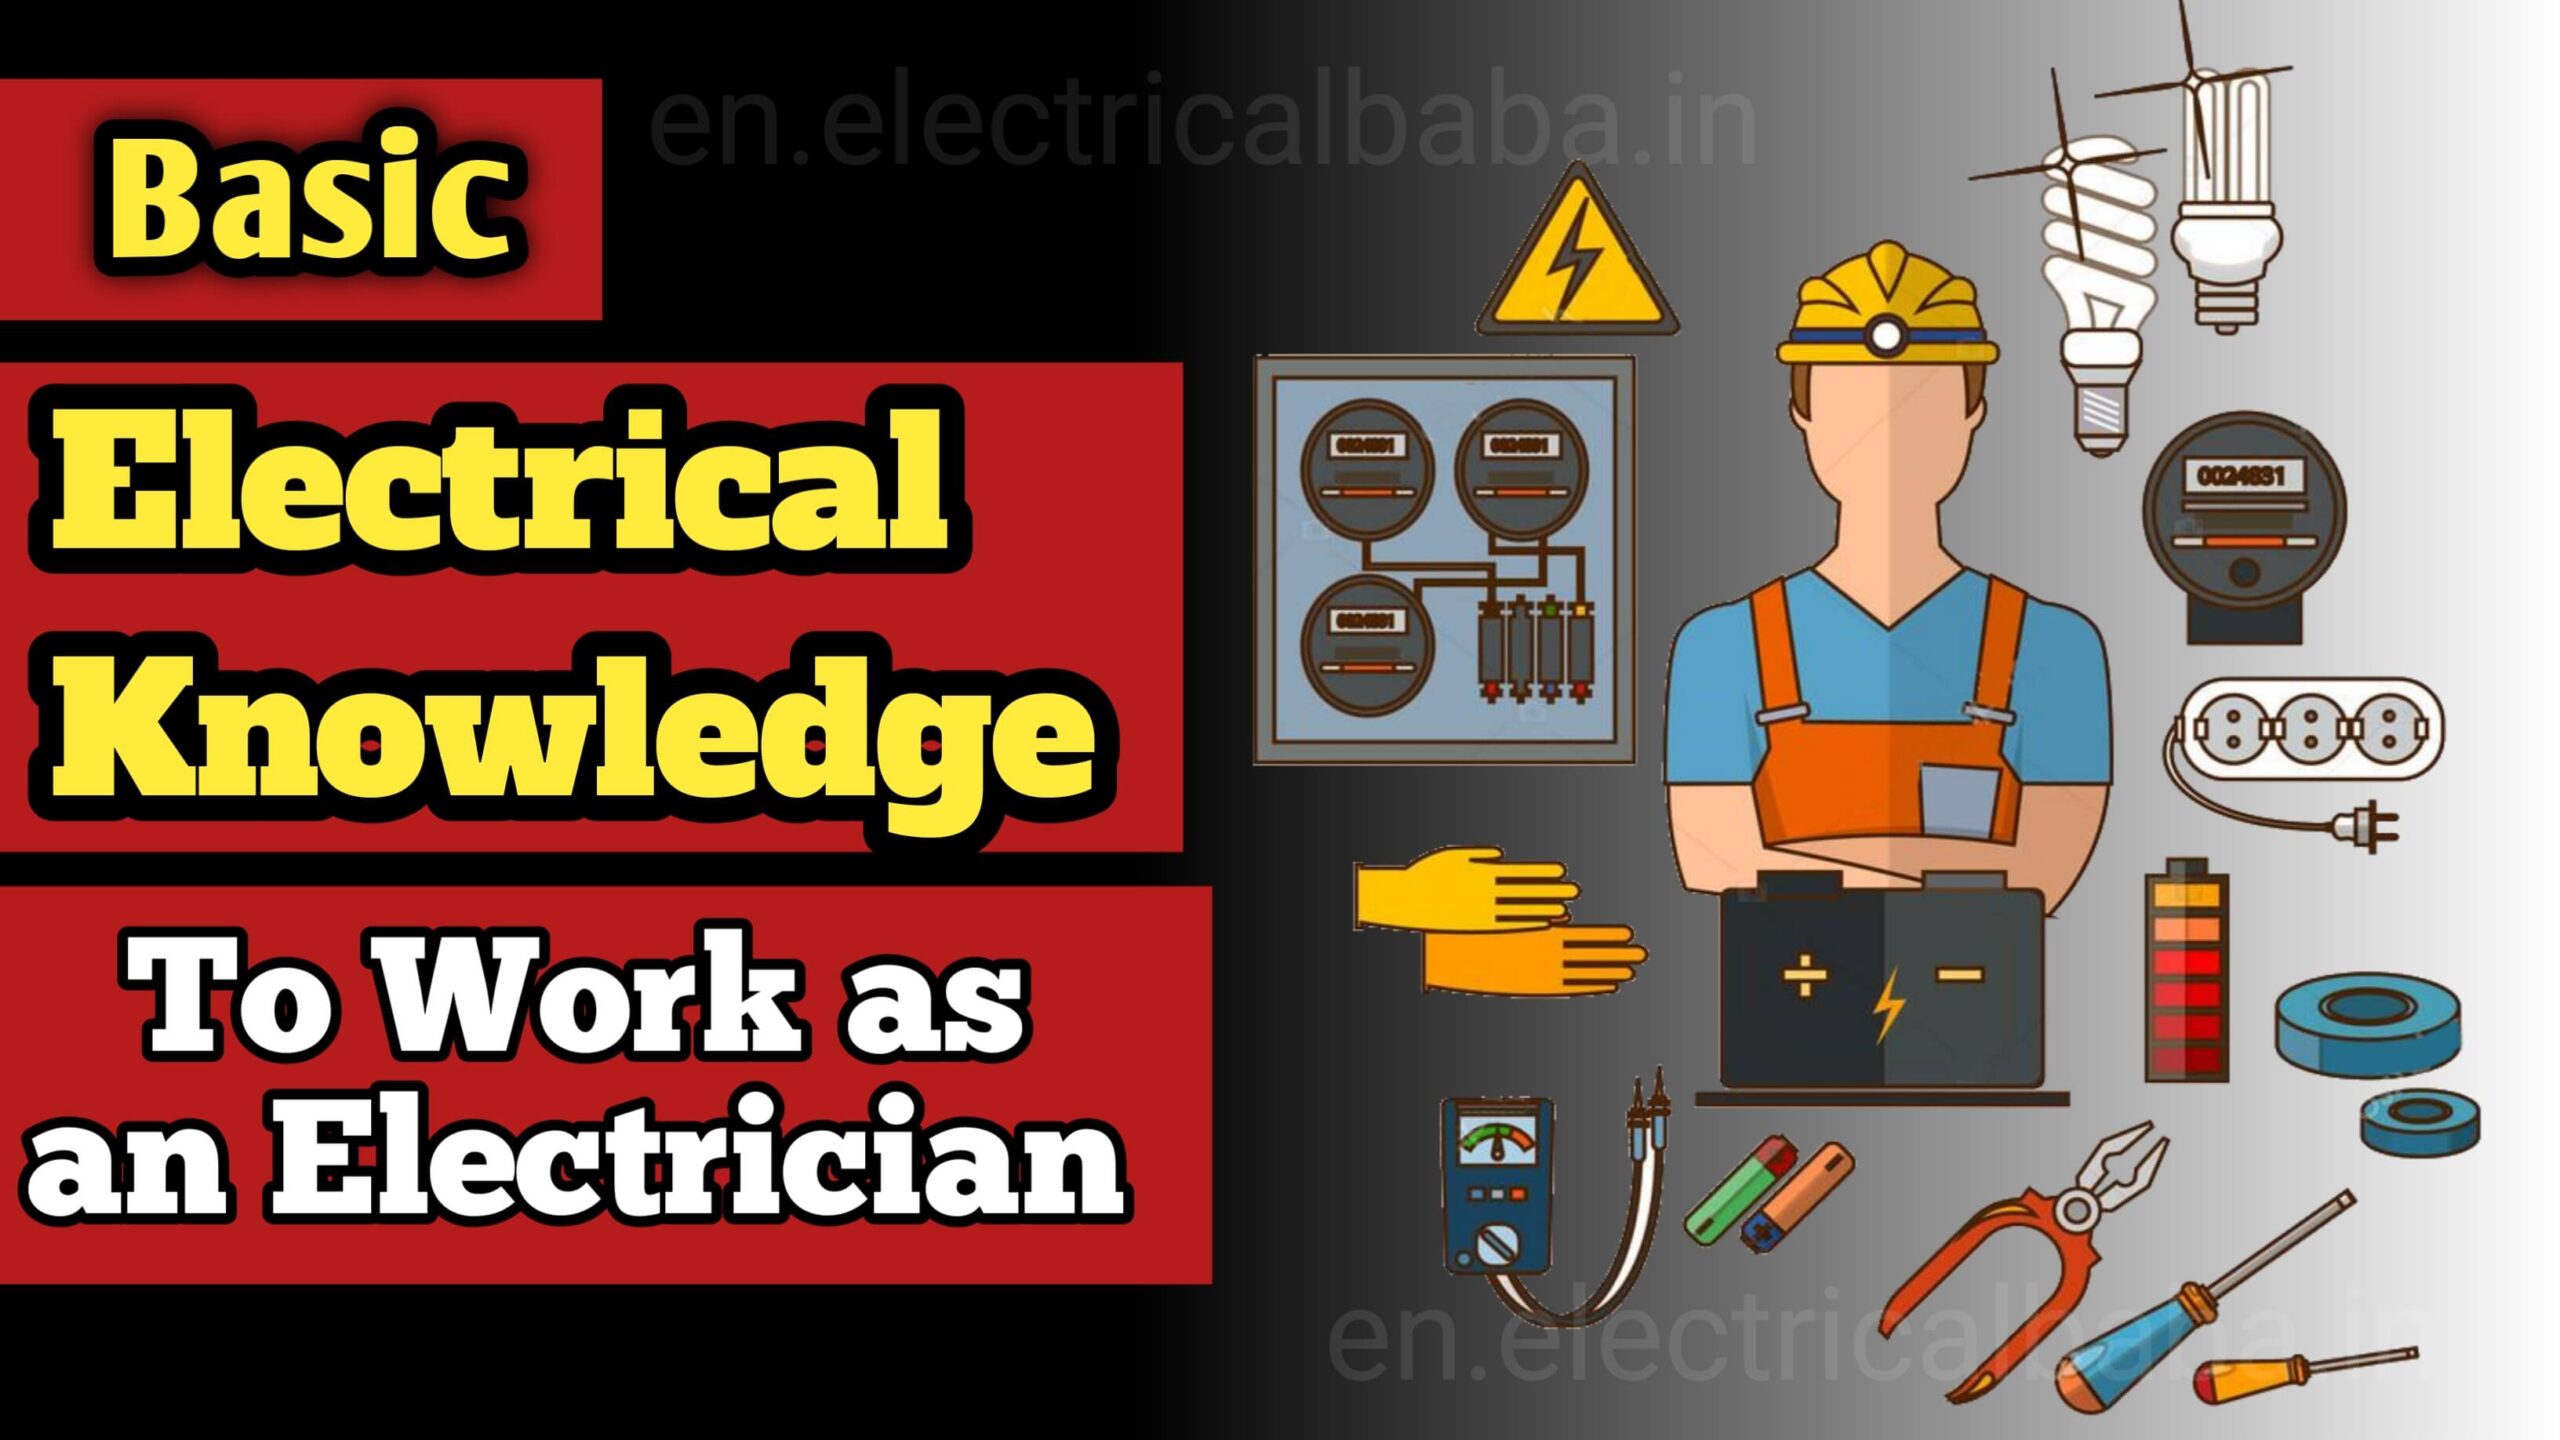 Basic Electrical Knowledge to work as an Electrician